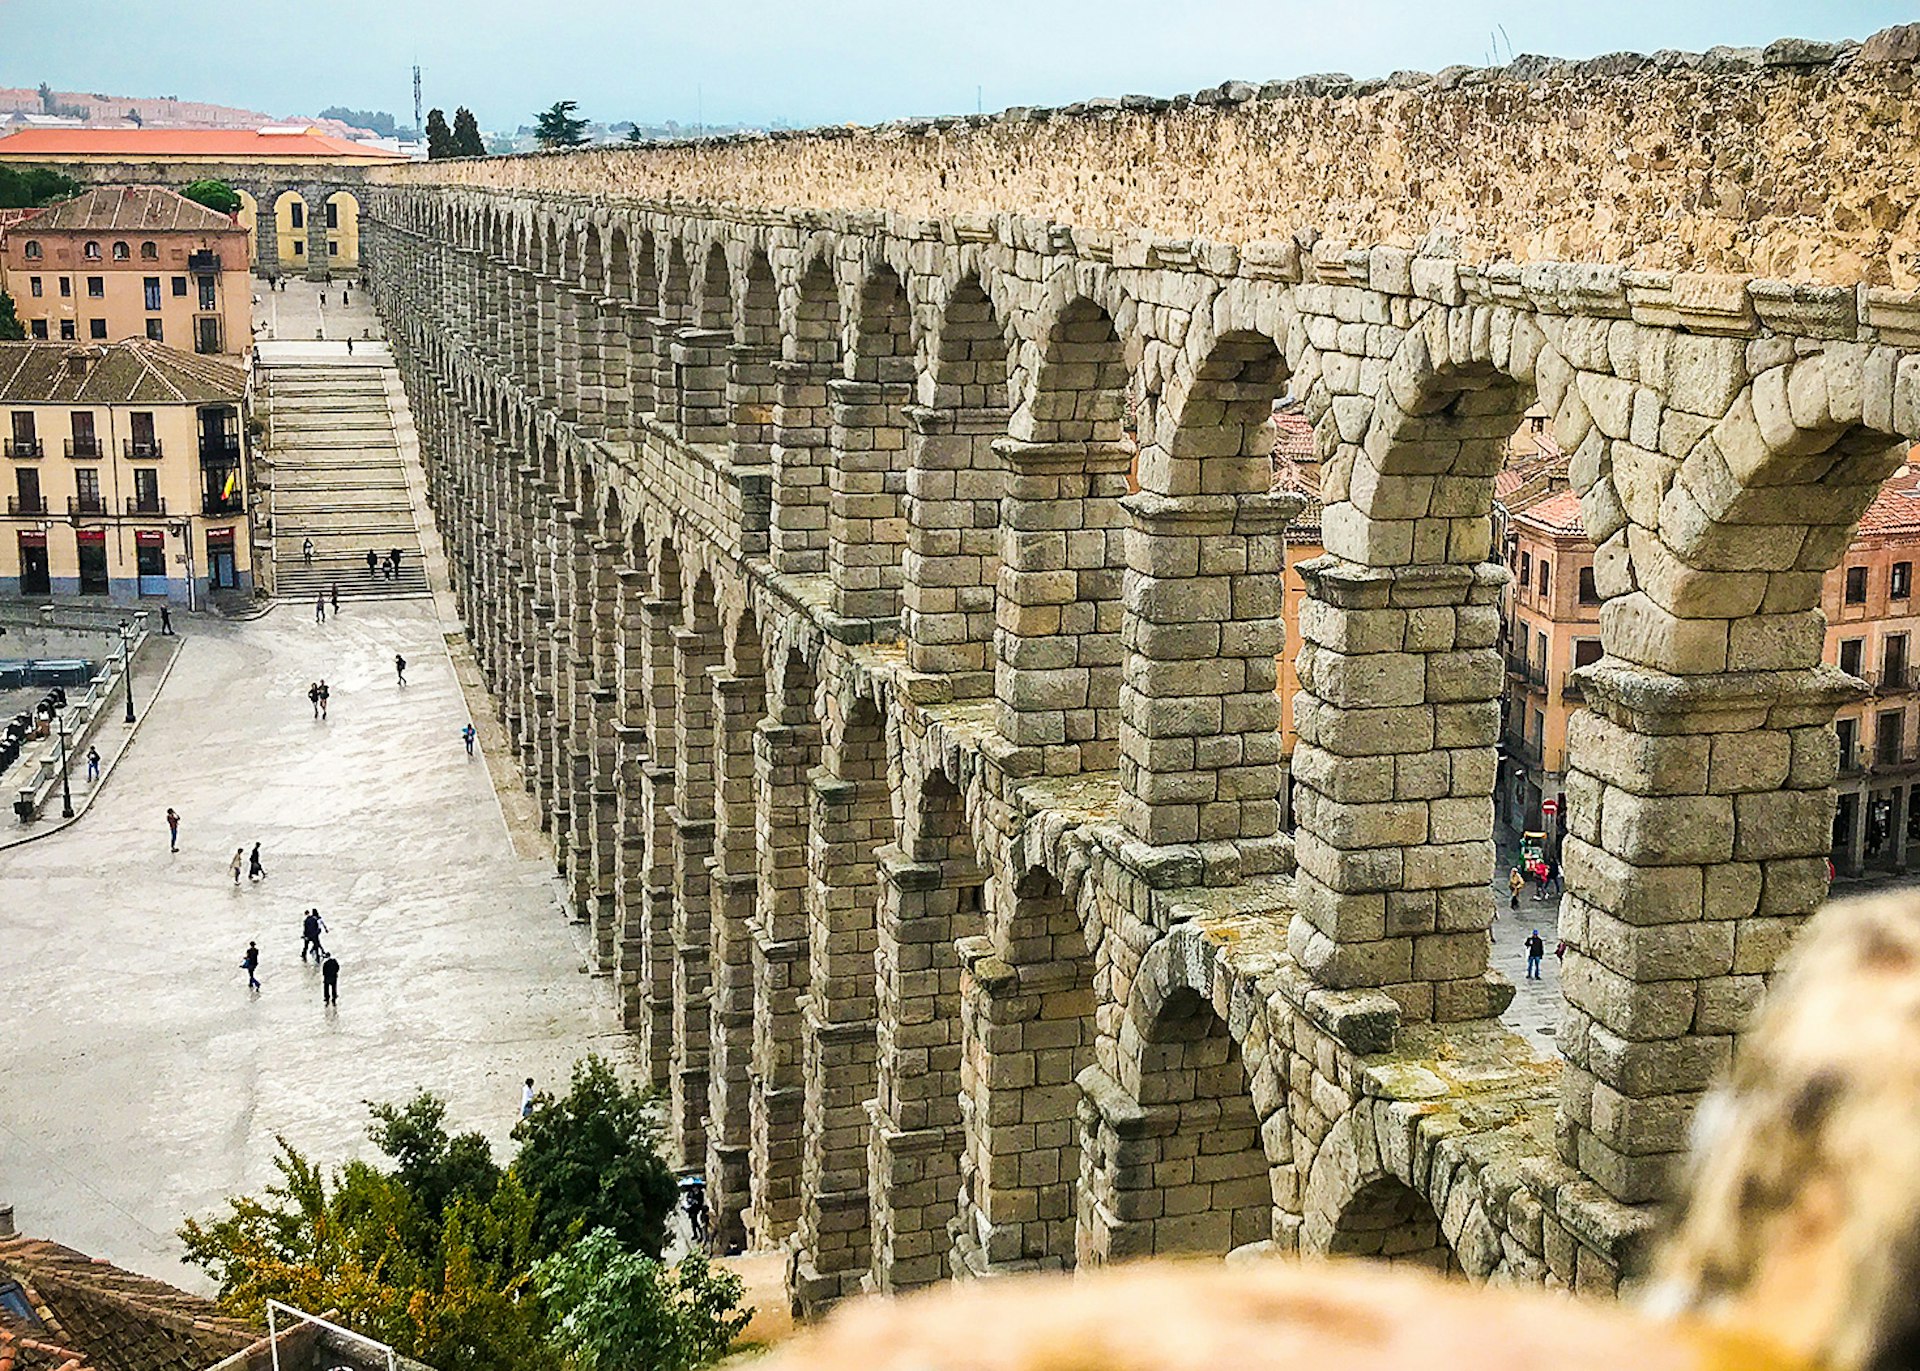 A Roman aqueduct stretches into the distance, with the charming Spanish city of Segovia in its shade.